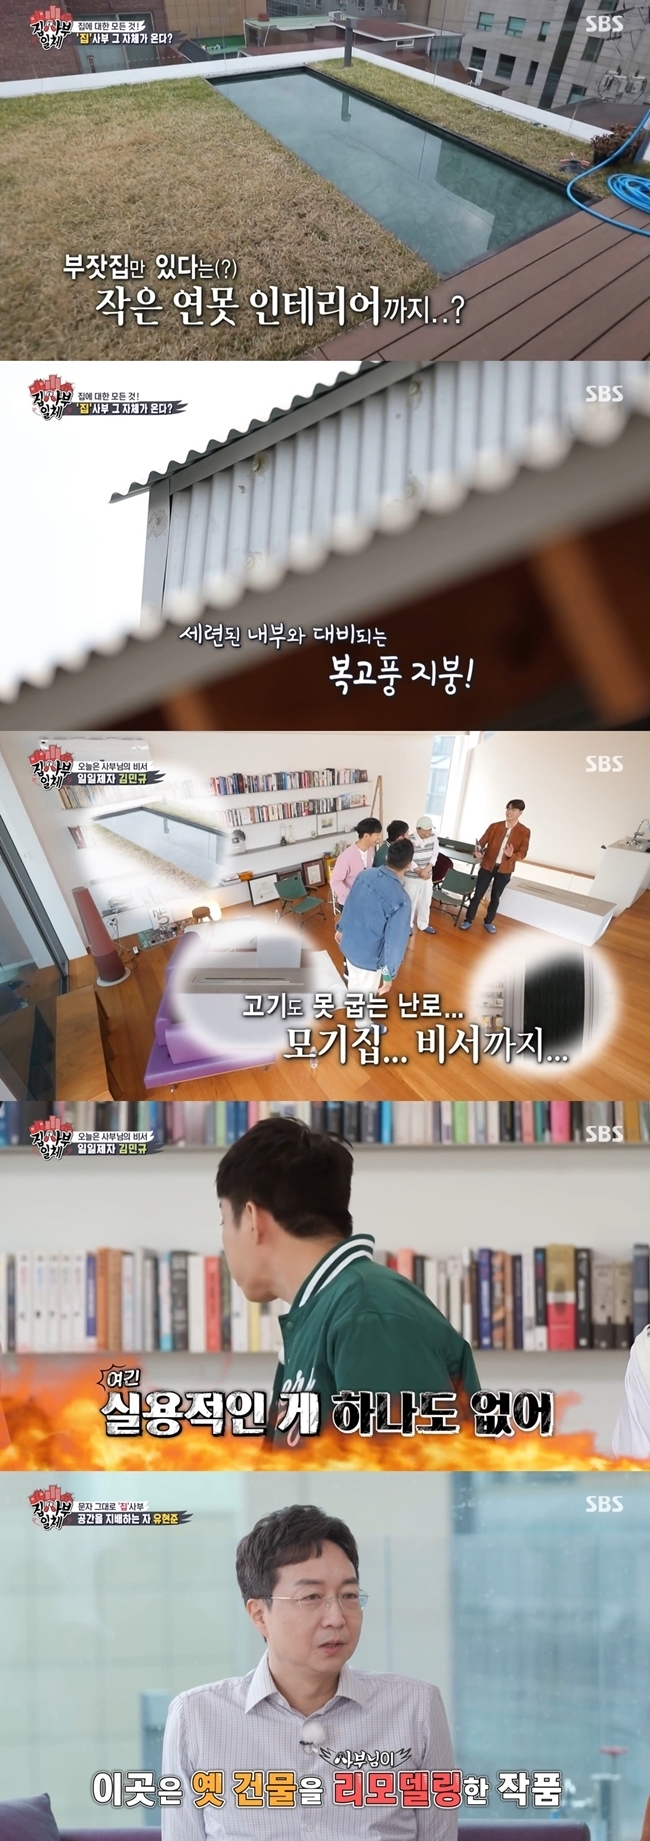 Eun Ji-won flew a stone fastball at the house of yu hun-jun architect.On April 24, SBS All The Butlers, Kim Min-gyu appeared as a daily student and architect Yu hun-jun as Sabu.On this day, the members looked around the house first before meeting Sabu, admiring the sensible Interiors, including a small pond in the house.On the other hand, Eun Ji-won laughed when he said, There is nothing practical and It is a mosquito house.Sabu yu hyun-jun architect who appeared with this introduced himself as a person who wants to make the world harmonious with space.Eun Ji-won said: I know this guy, but hes not an Interiors. Hes a professor.He came out in Natty World History and explained everything about architecture in history. 